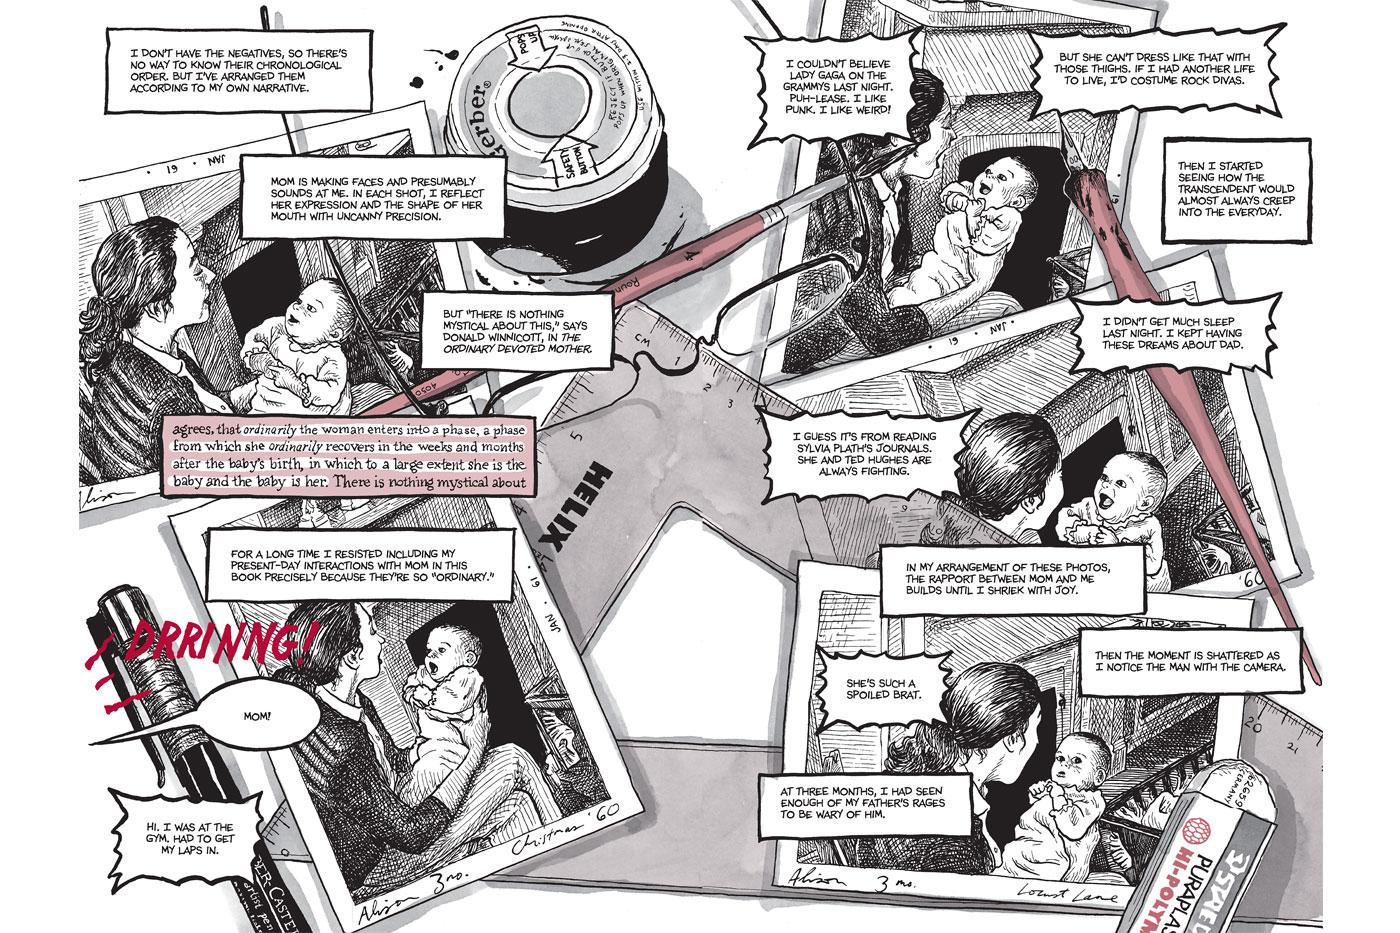 Pages 32-33 from Are You My Mother?: A Comic Drama